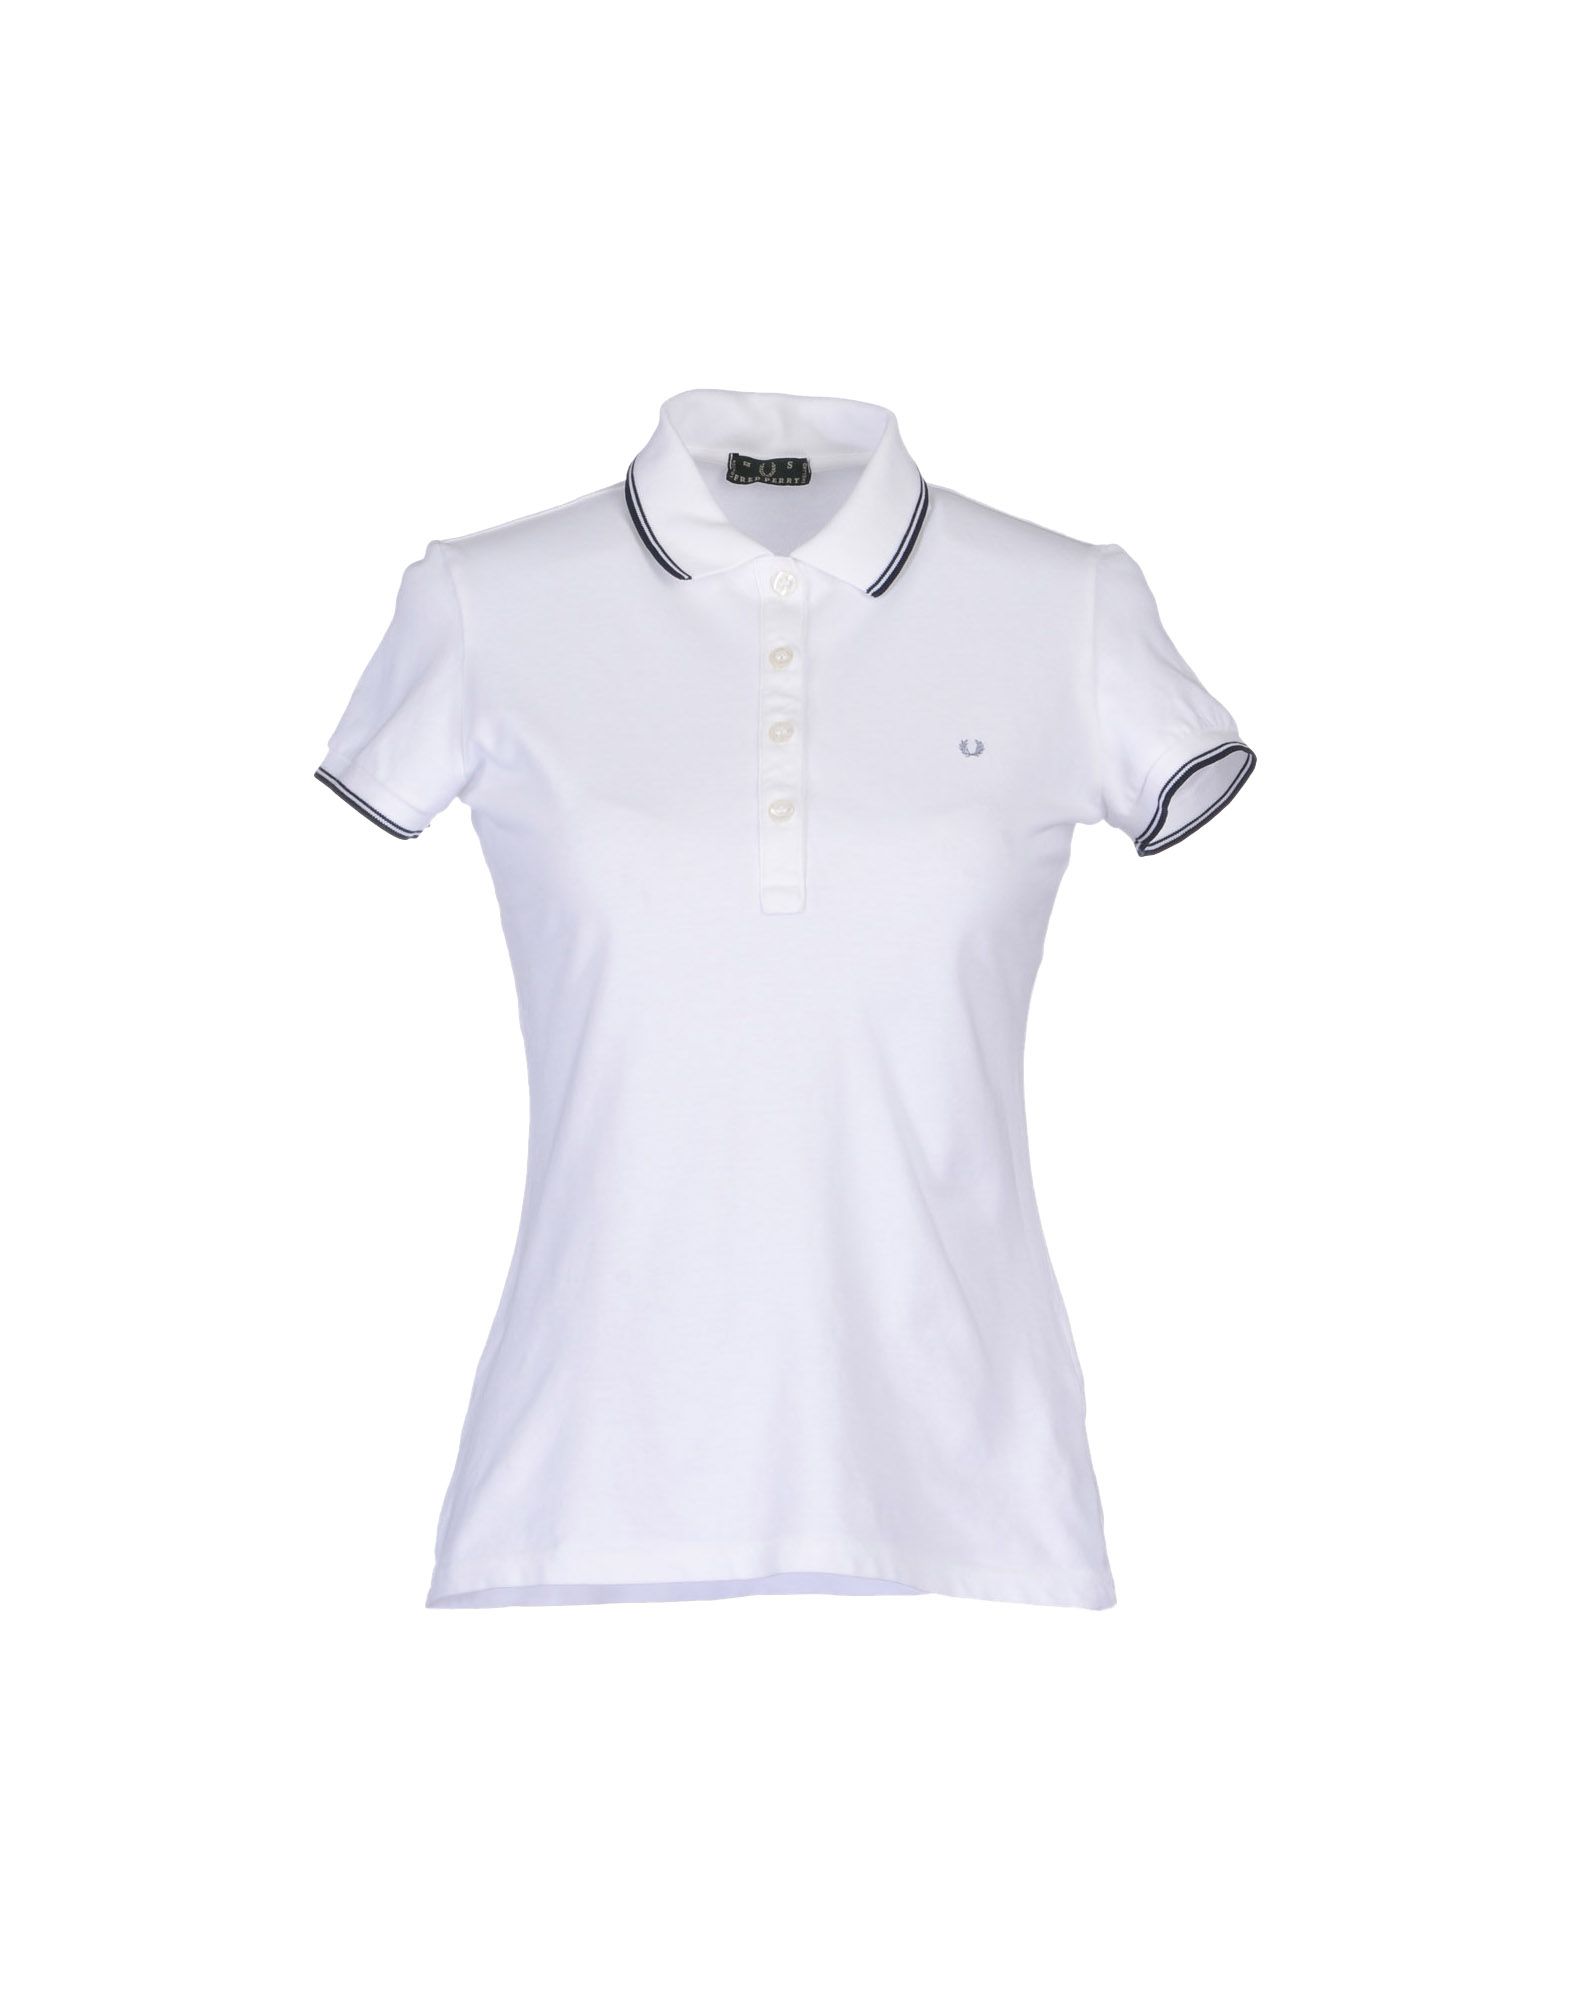 Foto fred perry polos
 foto 93566